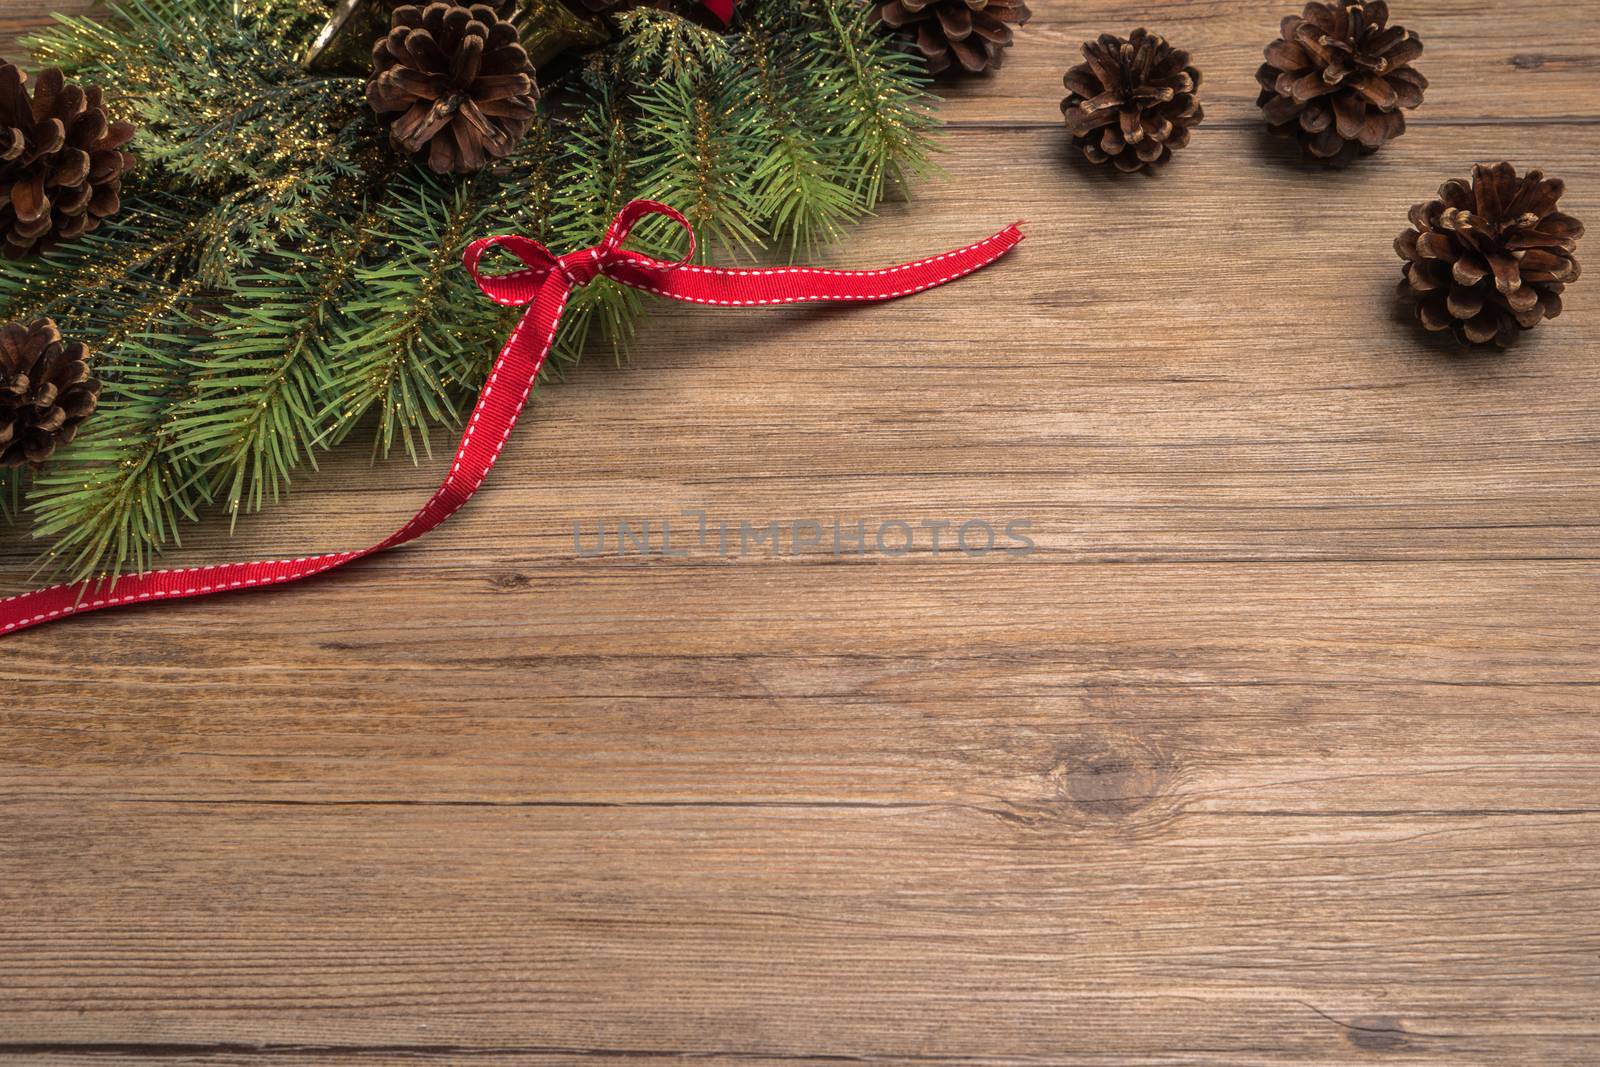 Christmas border design with pine cone, fir branches and ribbon over old oak wood